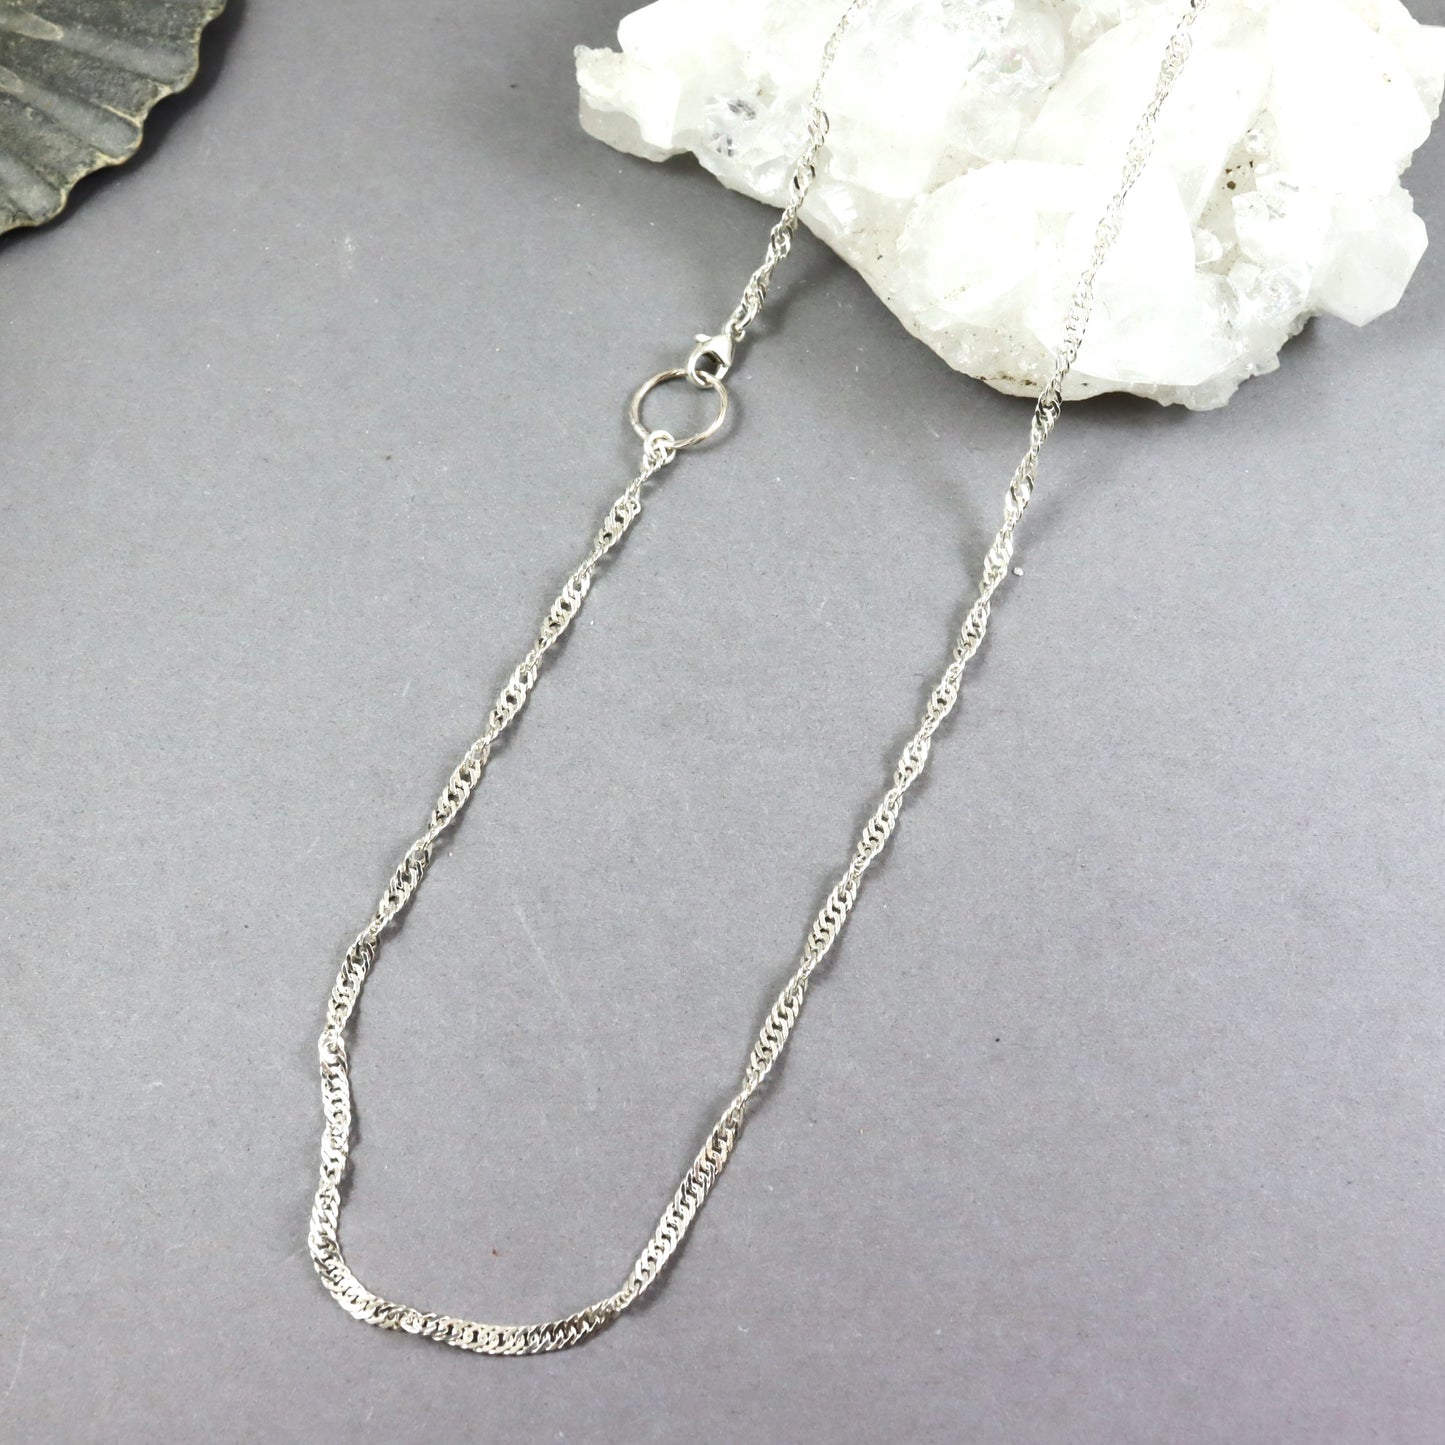 The Skye Necklace